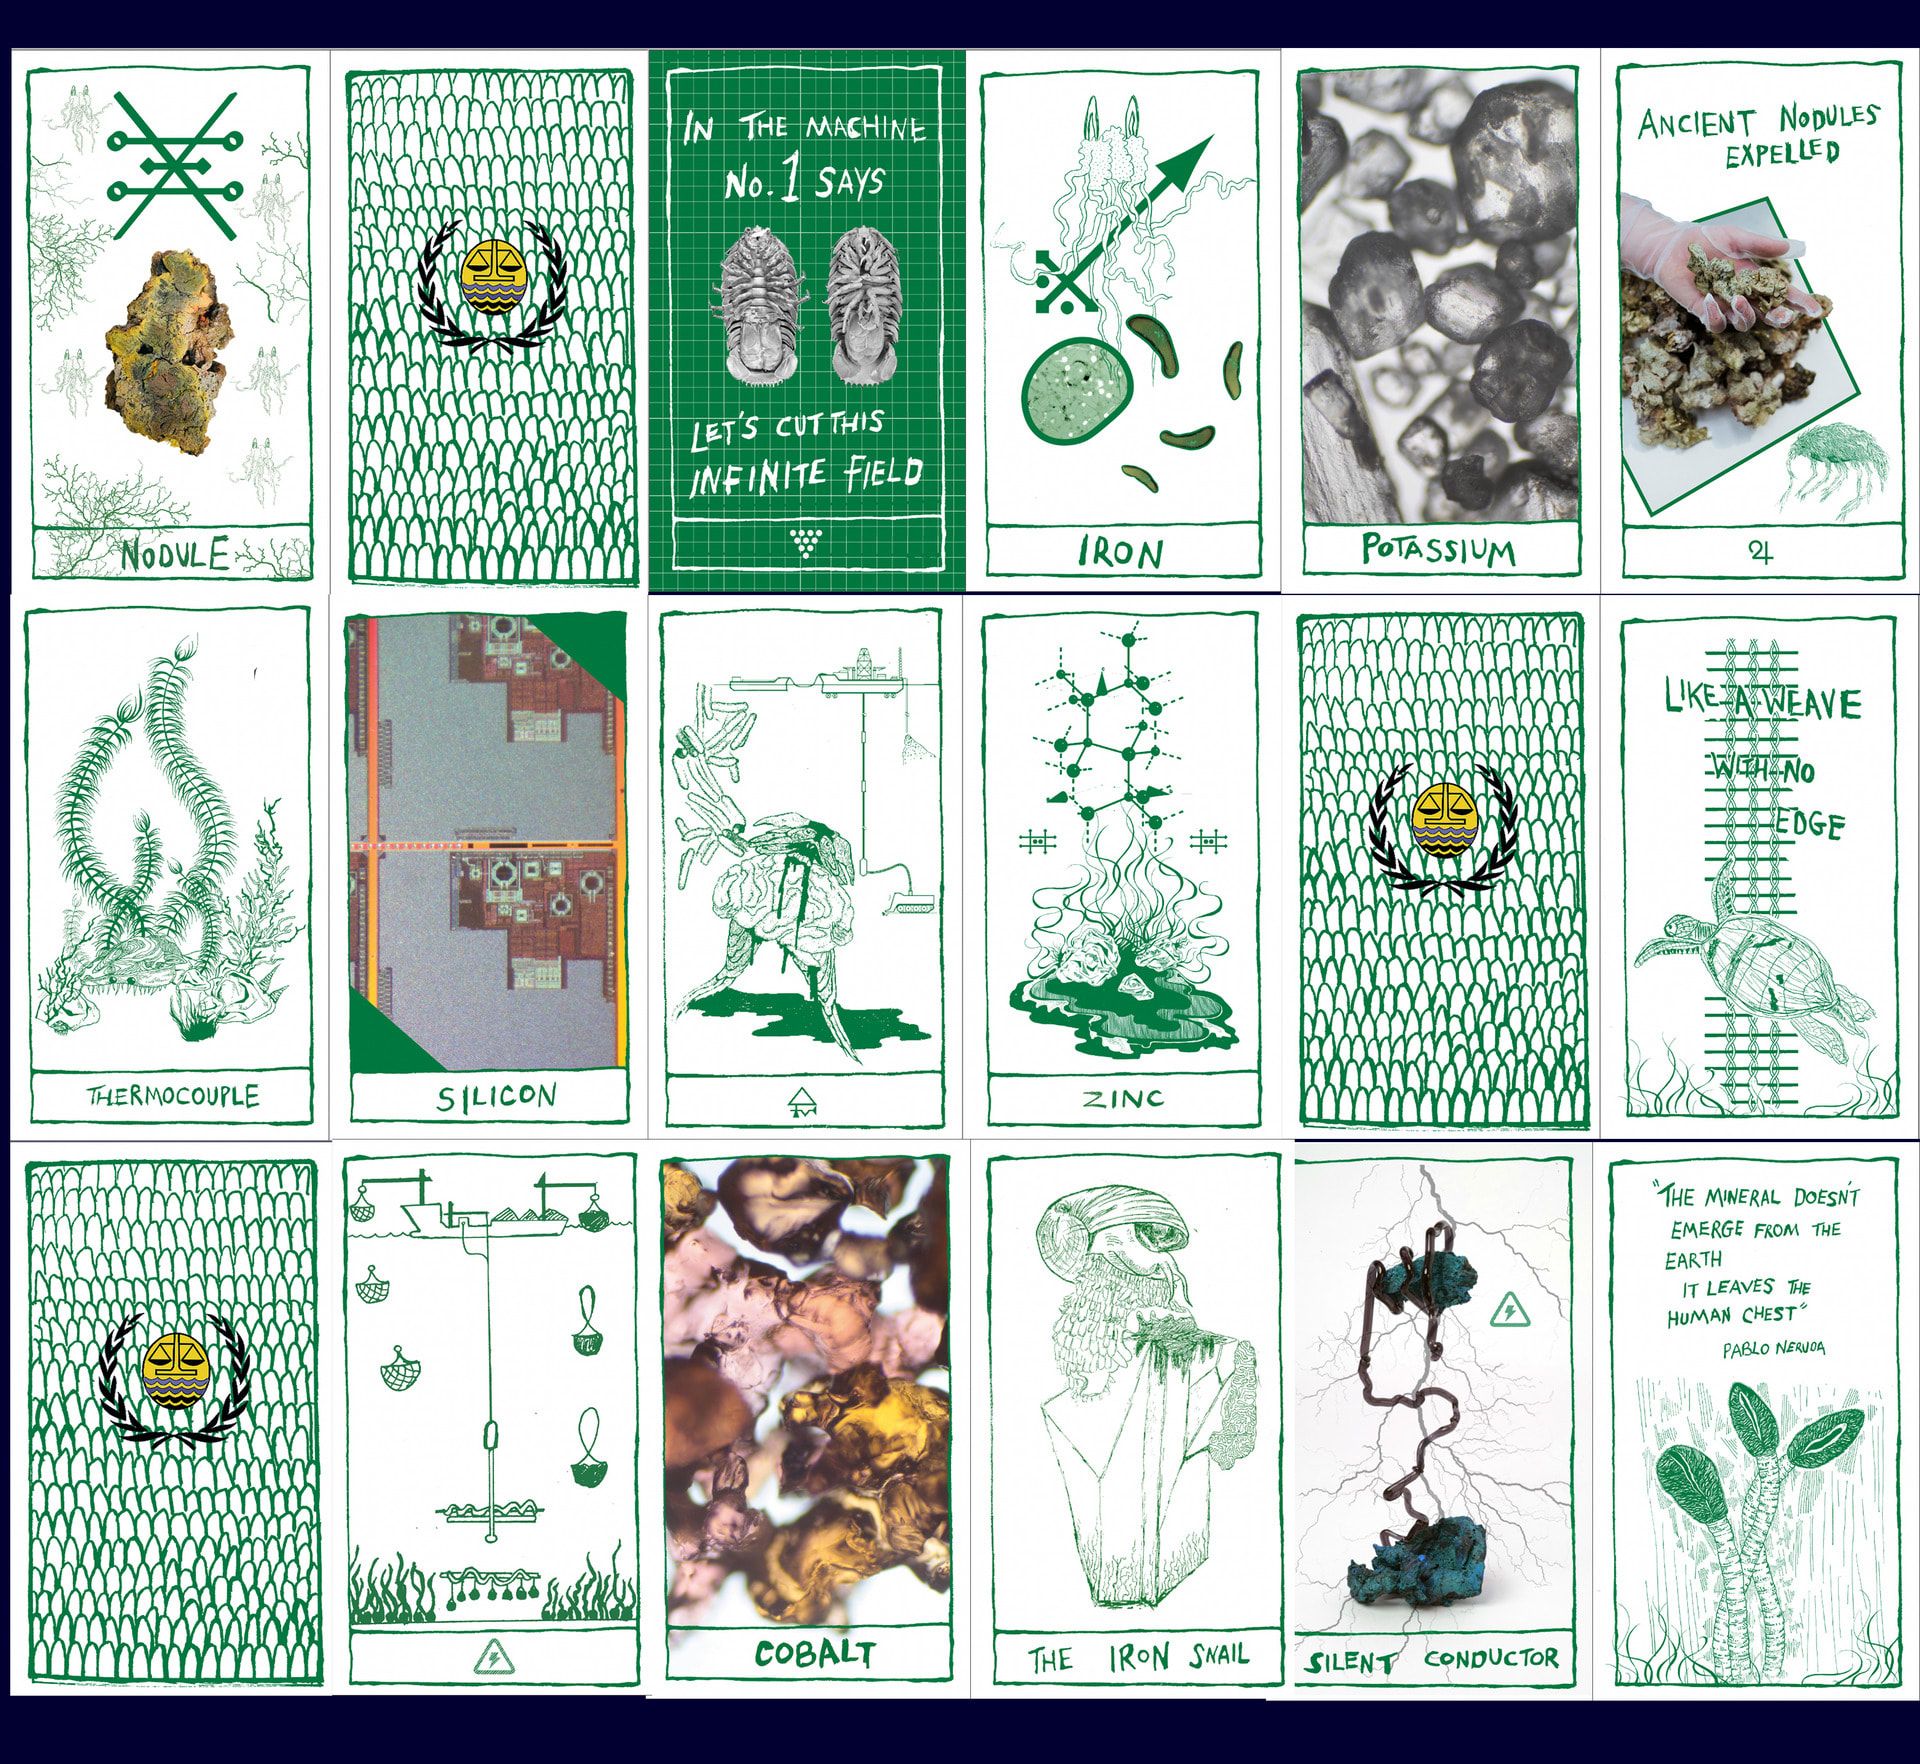 18 cards sit in a 3 by 6 grid, a mix of illustrations and photographs predominantly in green in the style of tarot cards but with images and text related to earthly materials.